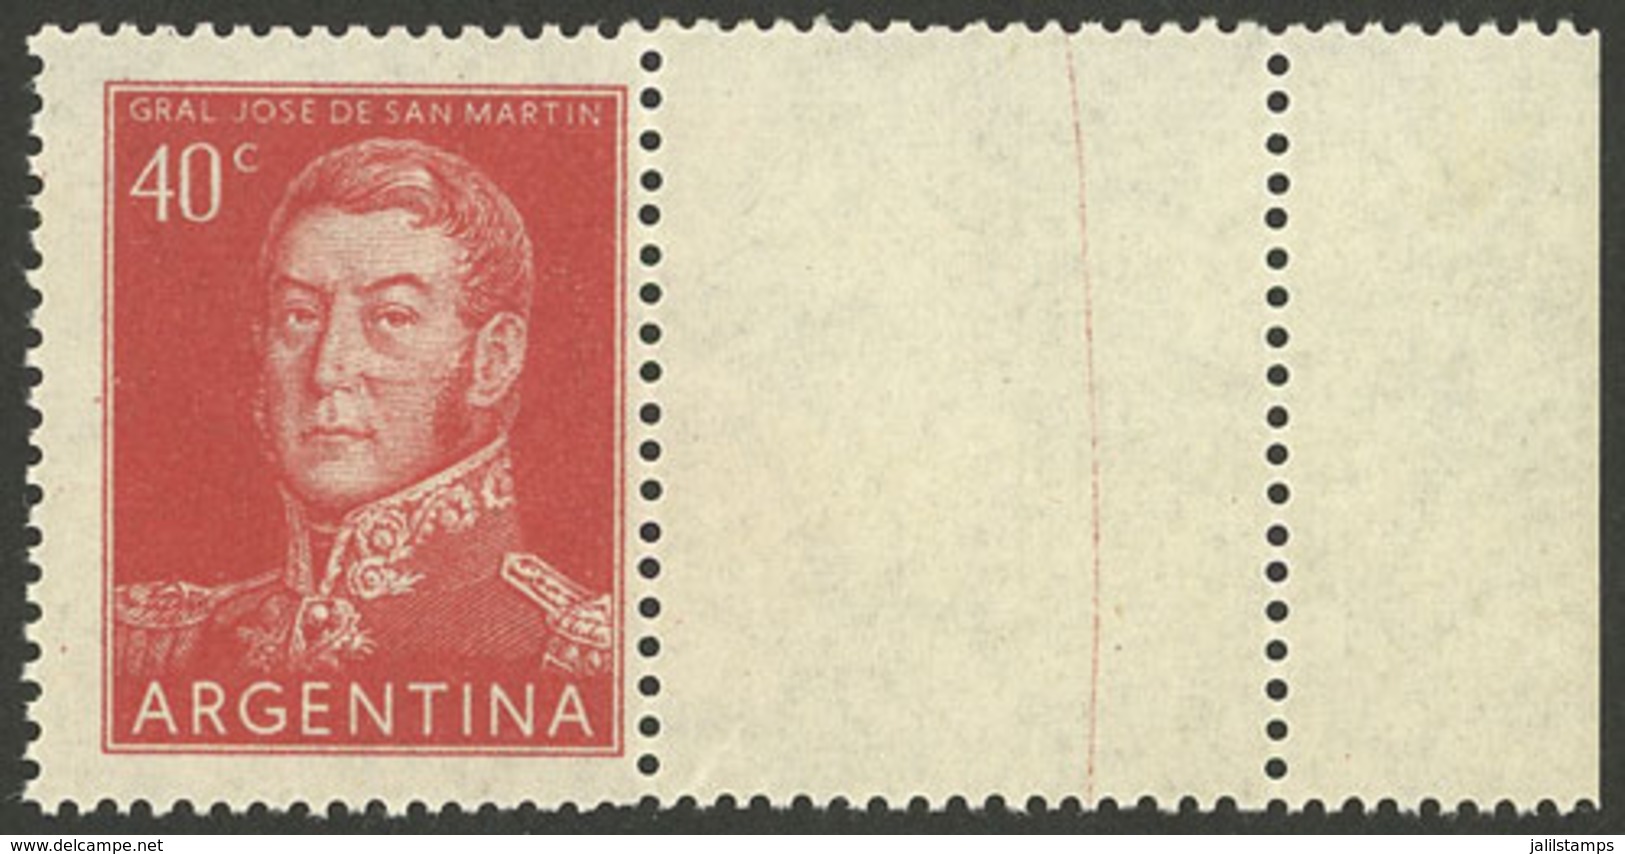 ARGENTINA: GJ.1041CD, 40c. San Martín WITH RIGHT LABEL, VF Quality! - Unused Stamps